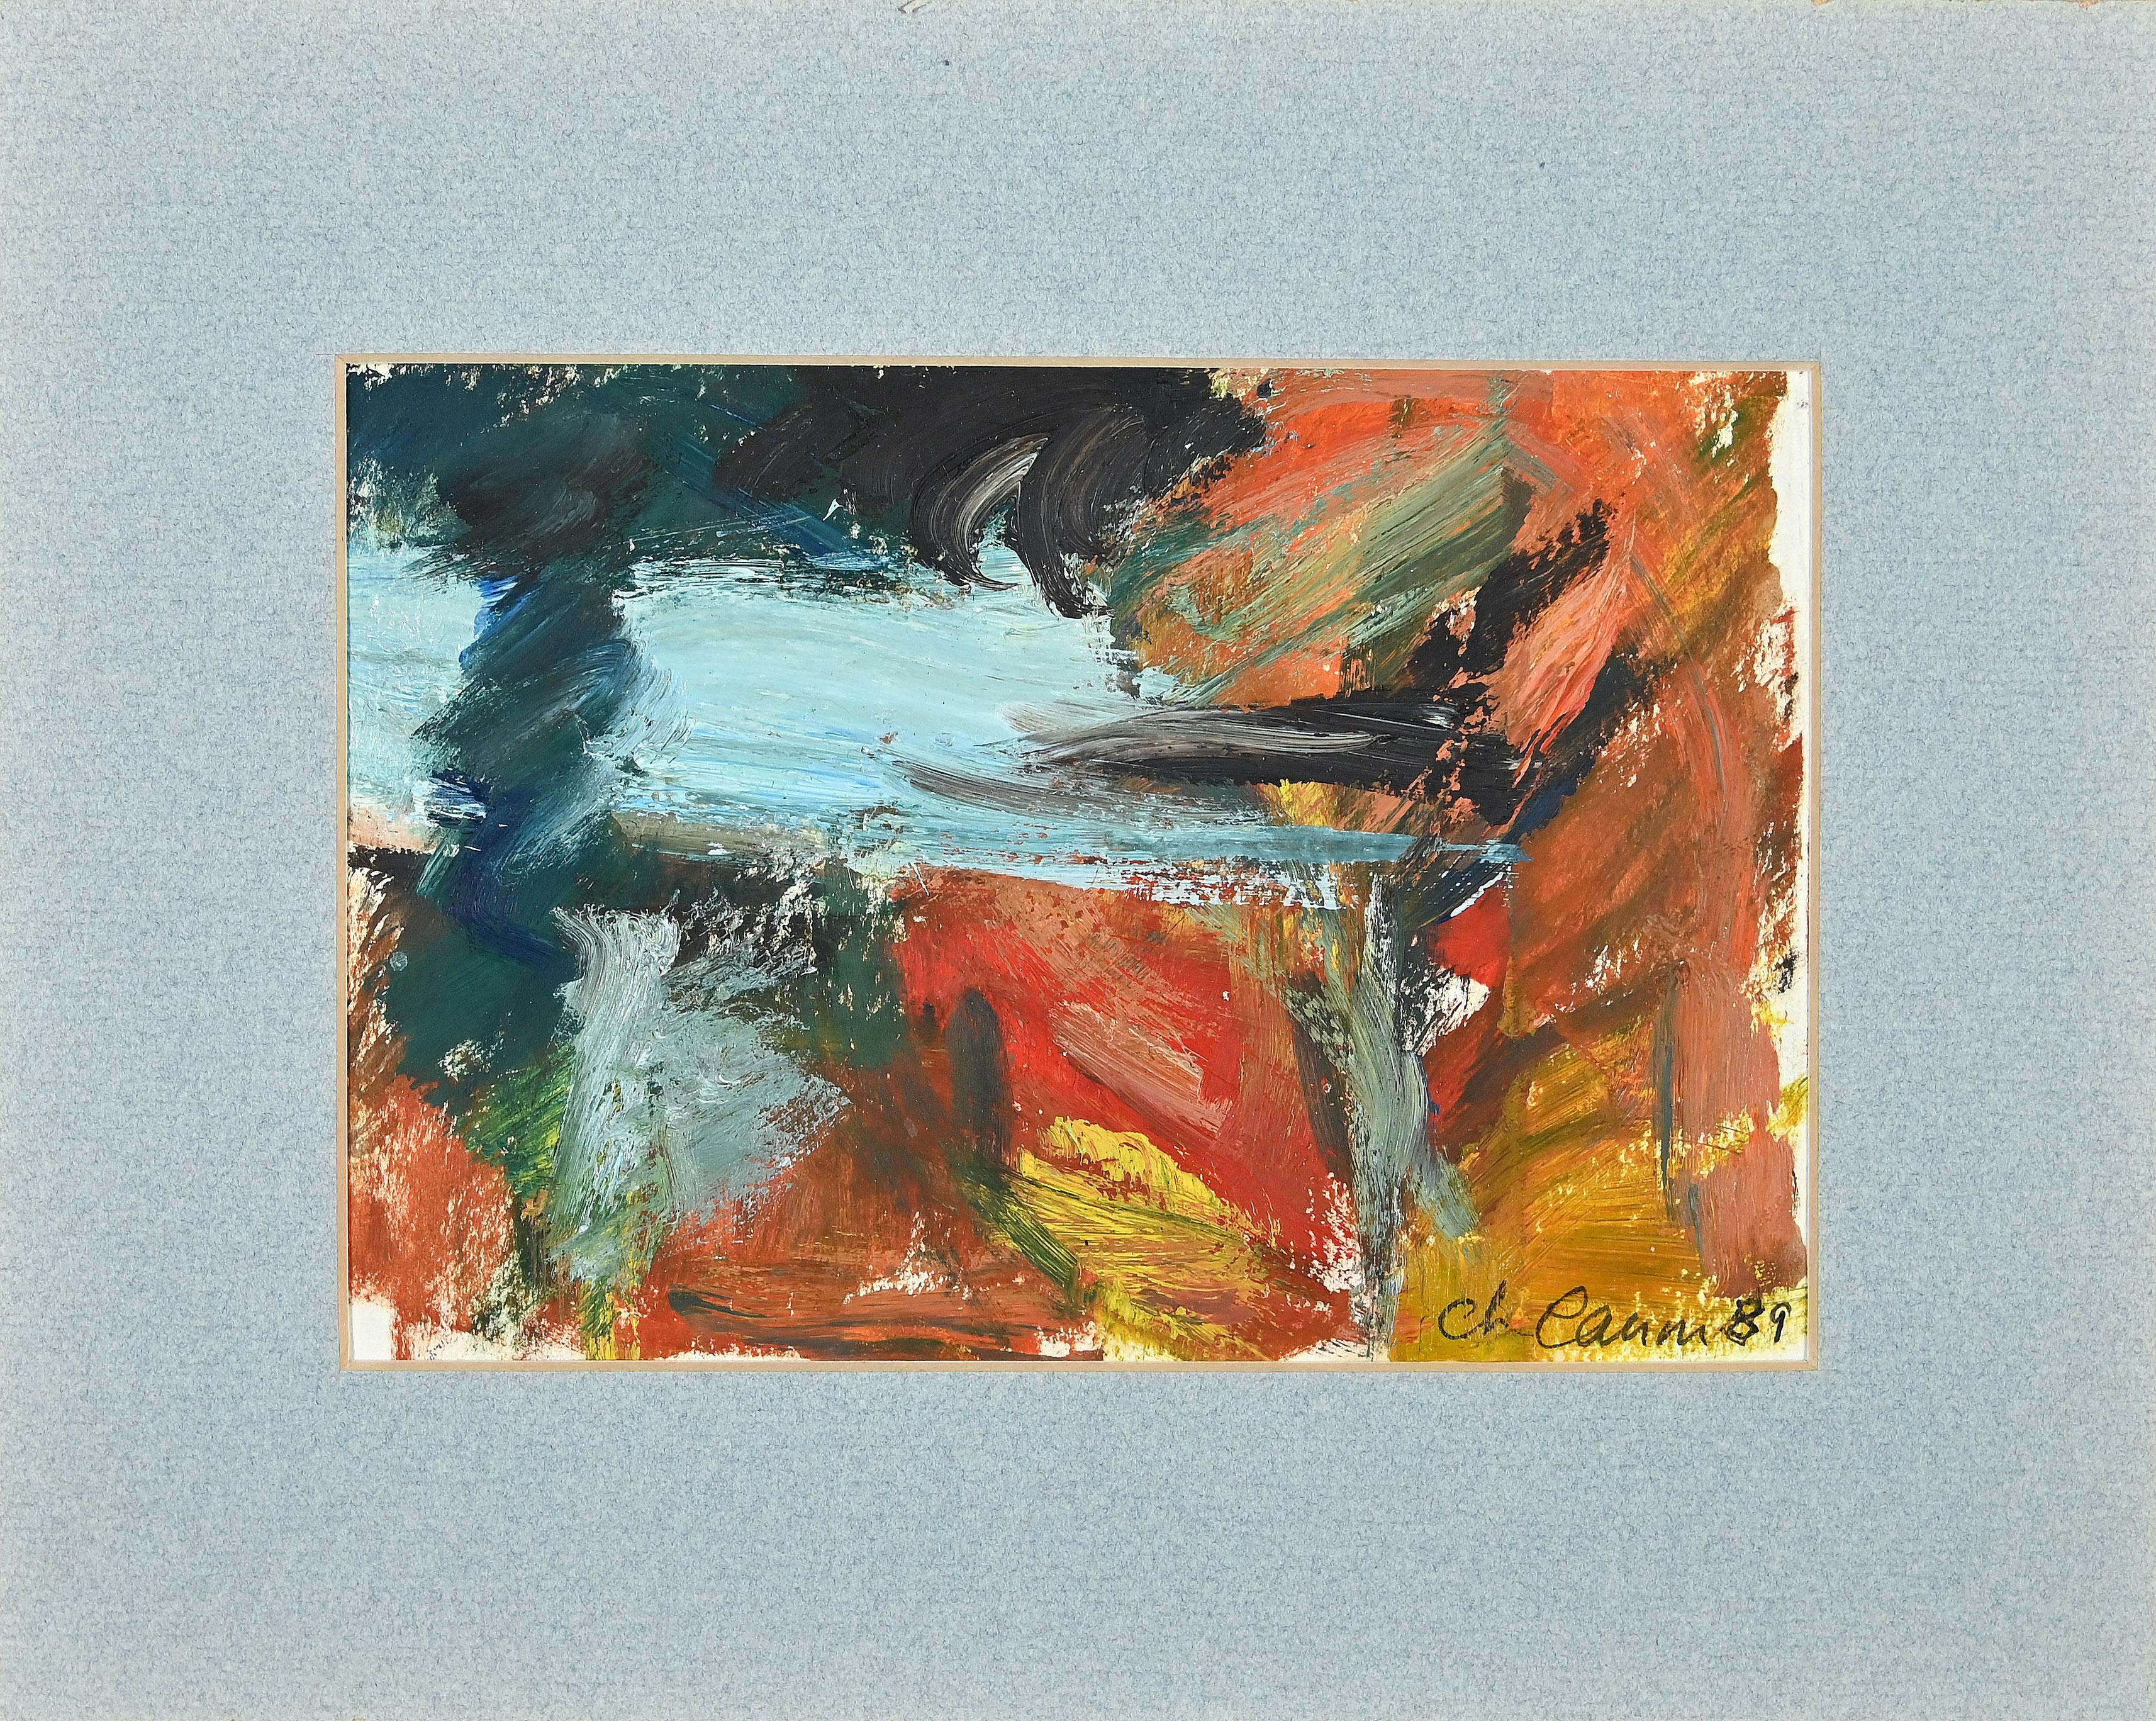 Unknown Abstract Painting - Composition - Original Oil on Cardboard - 1989